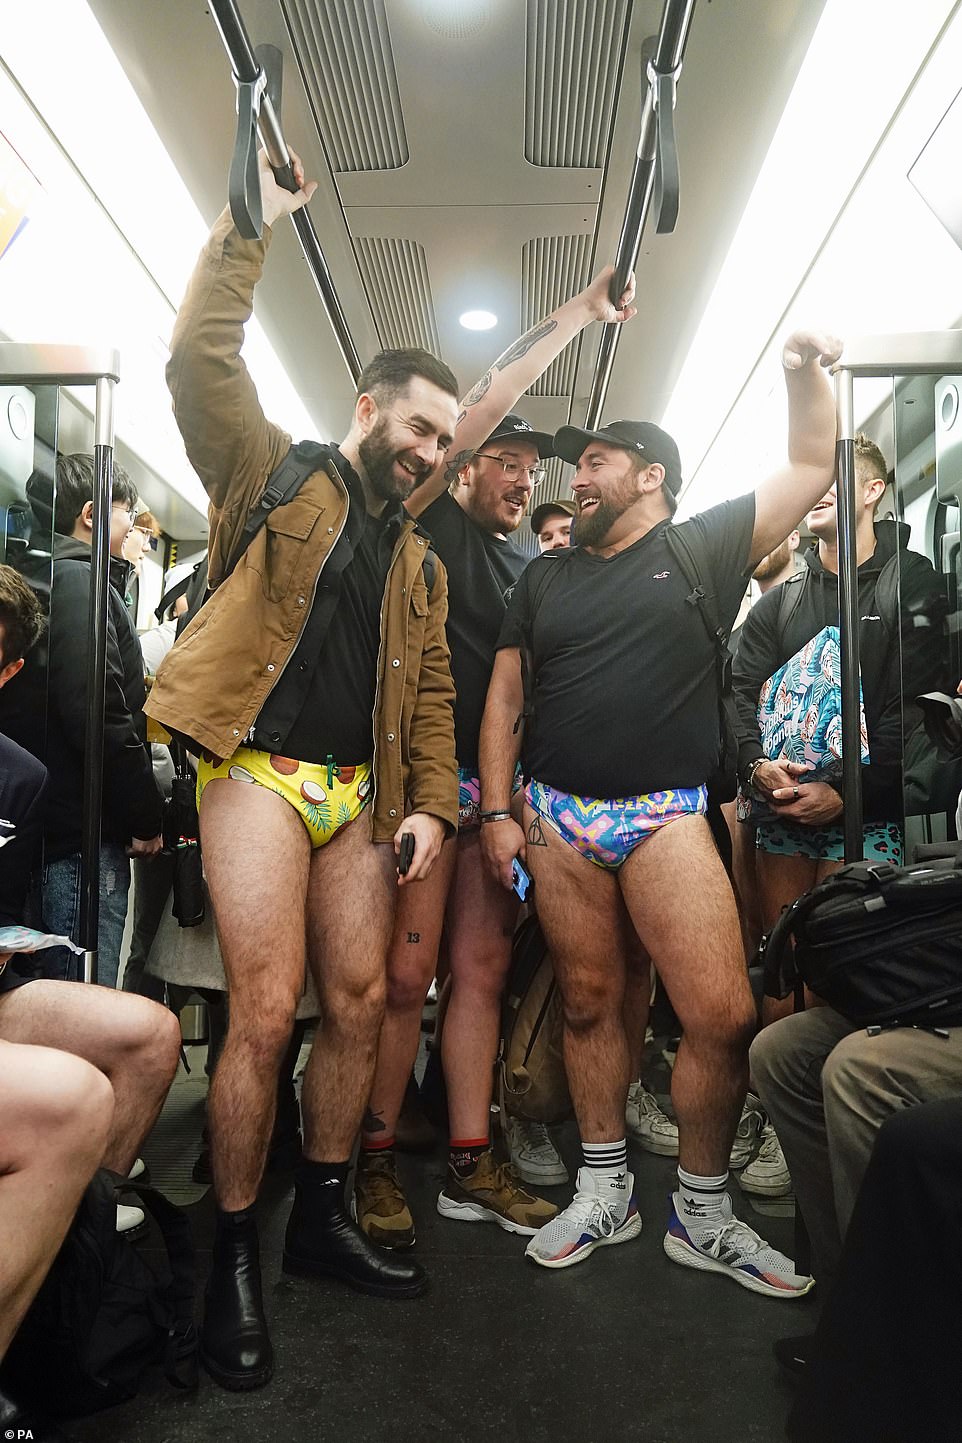 London commuters strip down to their pants for No Trousers Tube Ride   Evening Standard